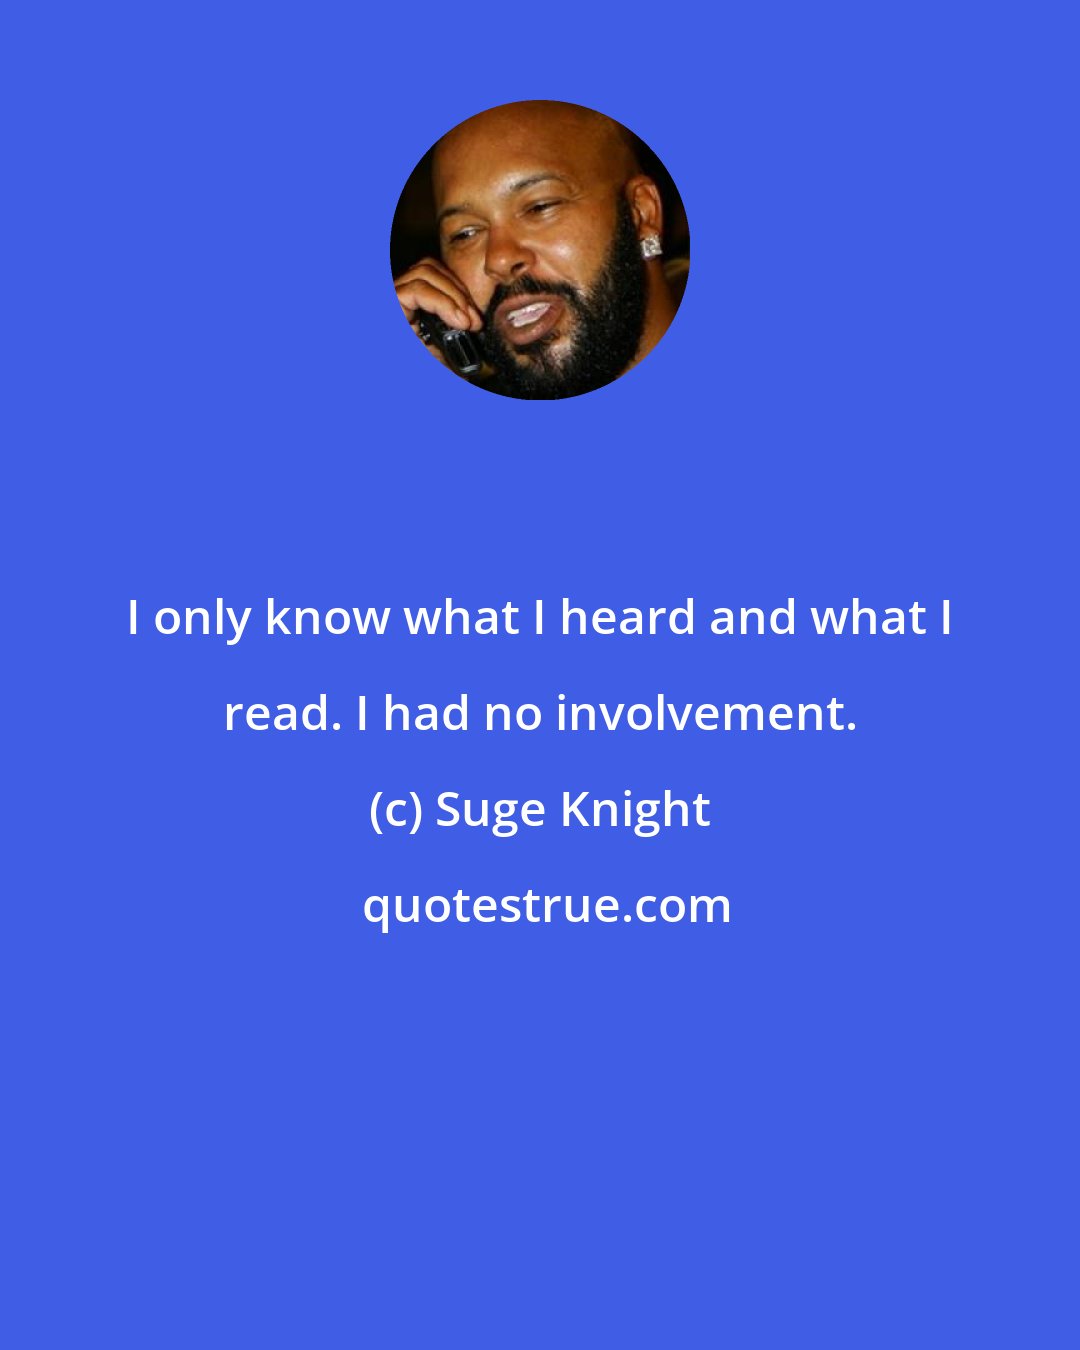 Suge Knight: I only know what I heard and what I read. I had no involvement.